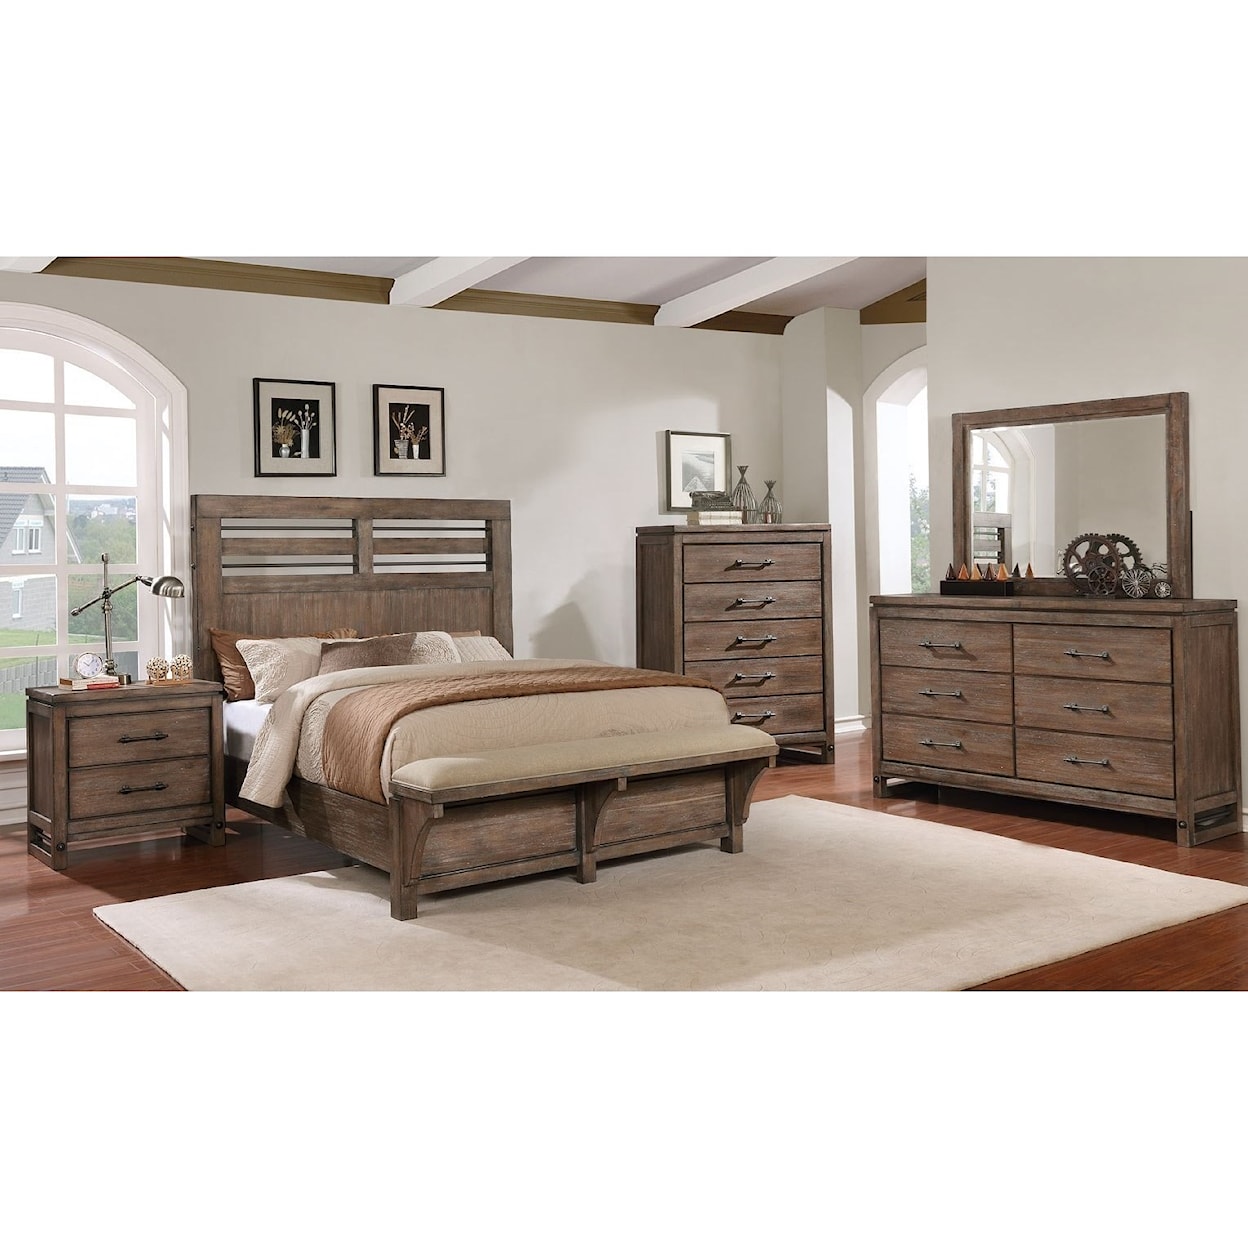 Avalon Furniture Round Rock King Bedroom Group